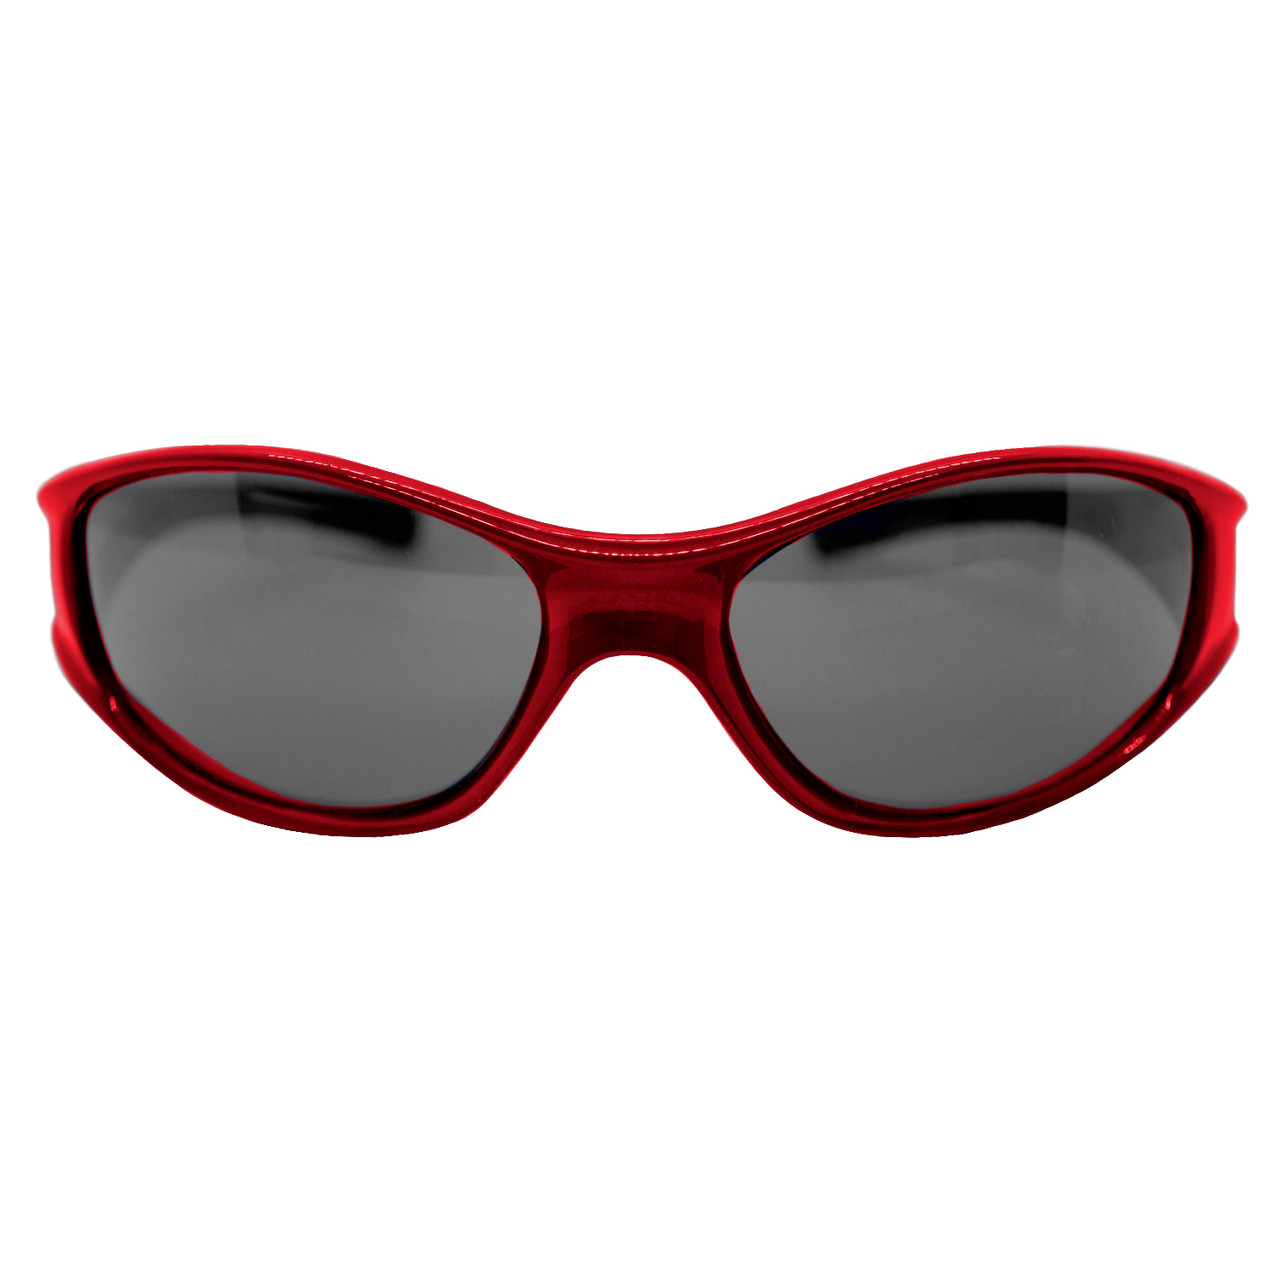 Ohio State Buckeyes Sports Rimmed College Sunglasses (Red)